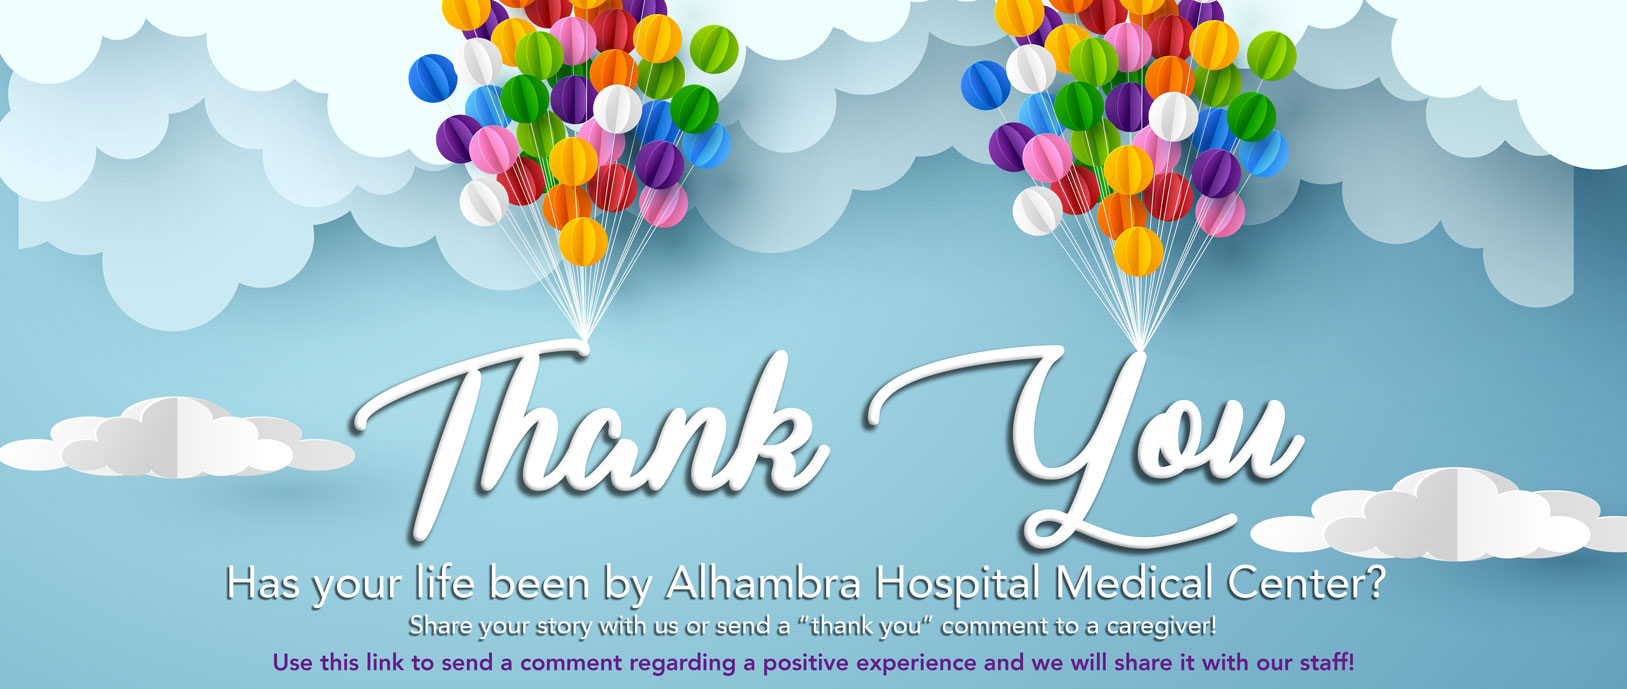 Banner picture of clouds with a bunch of balloons.

Banner says: Thank You
Has your life been by Alhambra Hospital Medical Center?
Share your story with us or send a "thank you" comment to a caregiver!
Use this link to send a comment regarding a positive experience and we will share it with our staff!